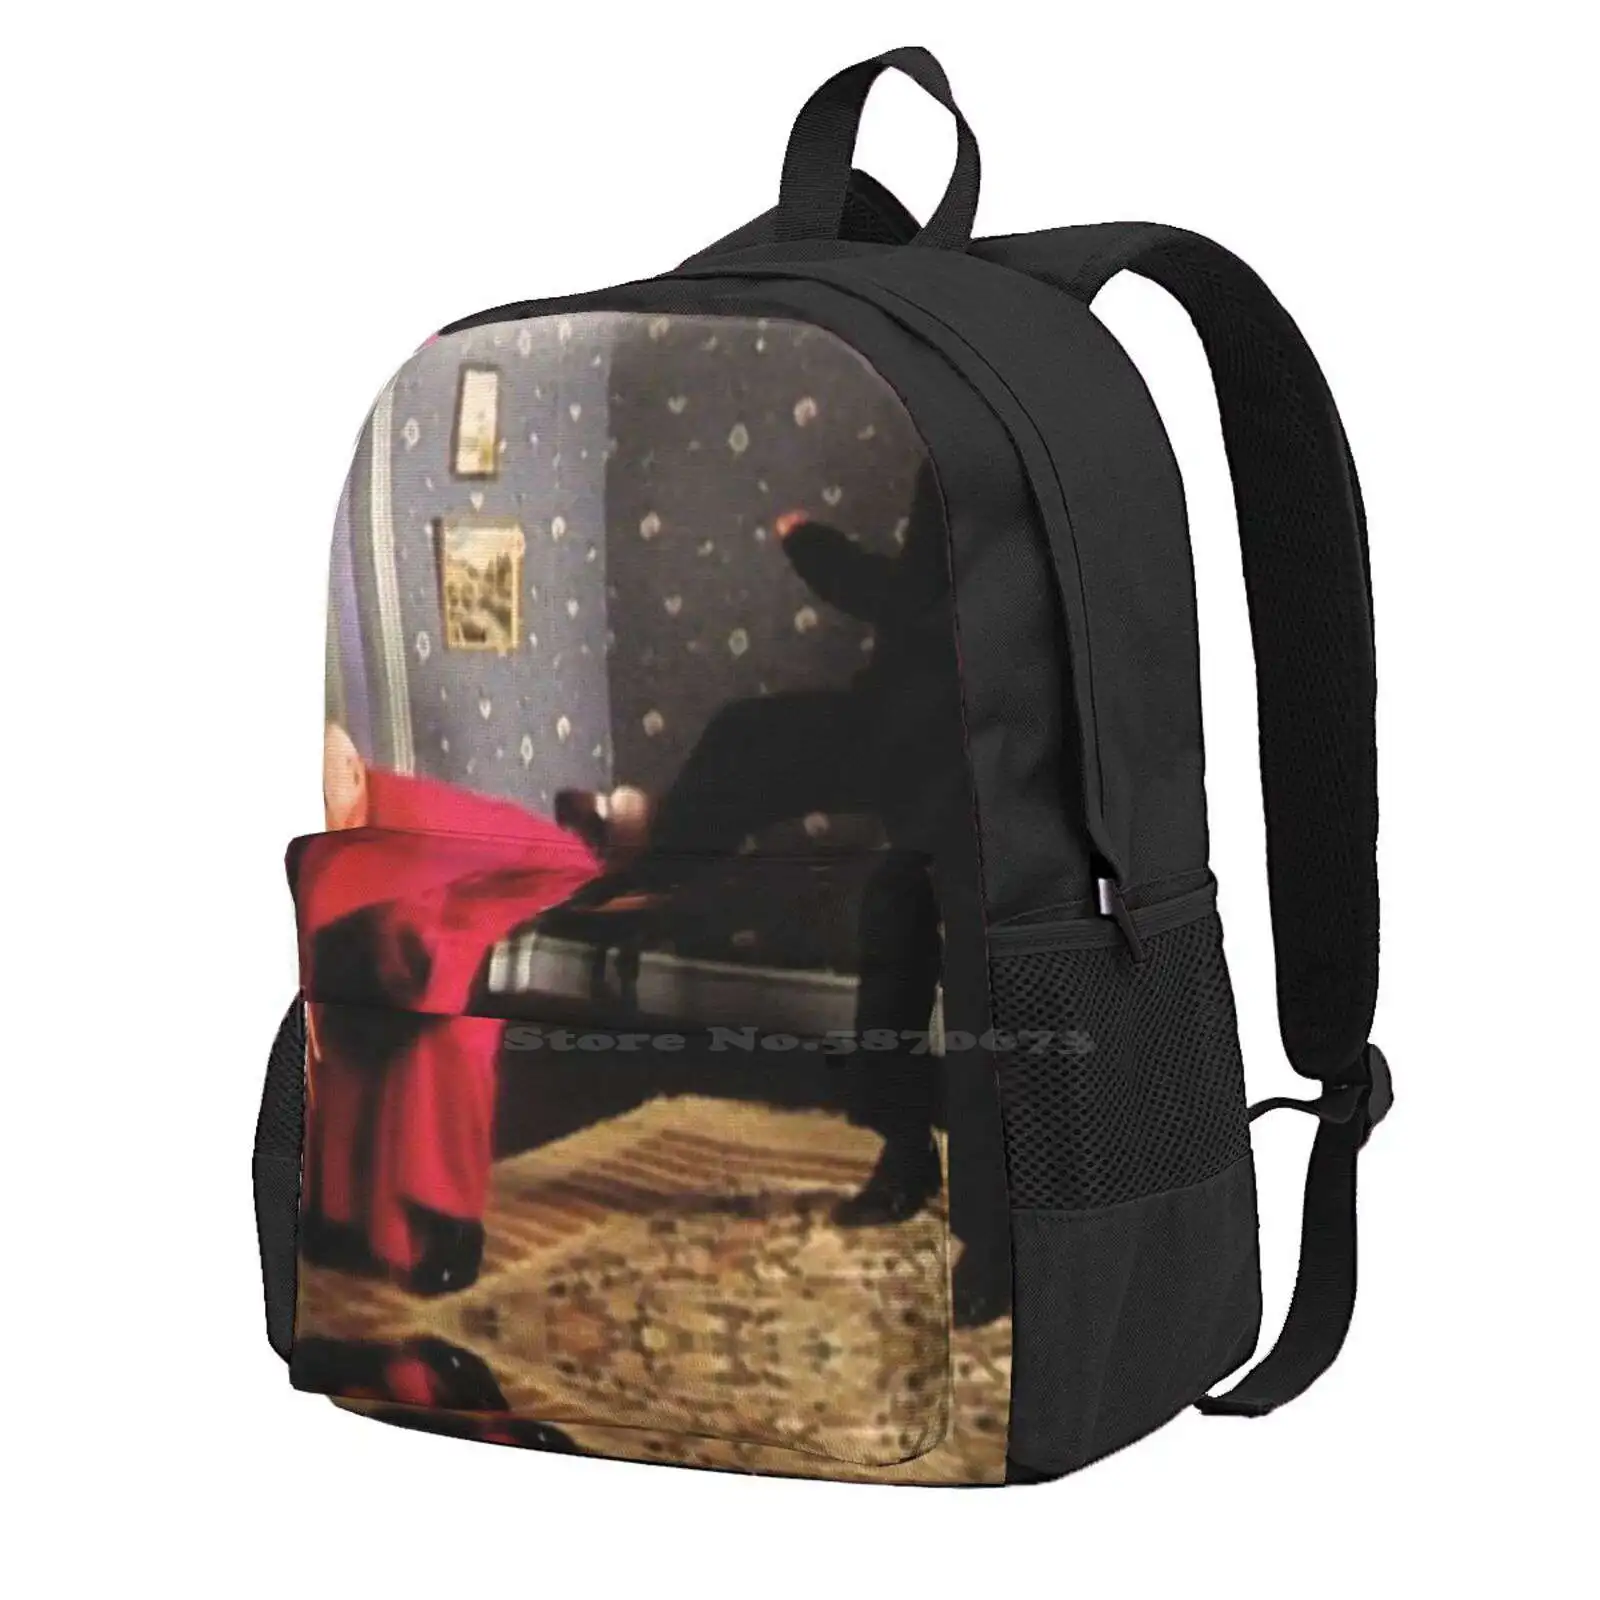 

Father Ted-Framed Picture Of Bishop Brennan Being Kicked Up The Arse Backpack For Student School Laptop Travel Bag Father Ted